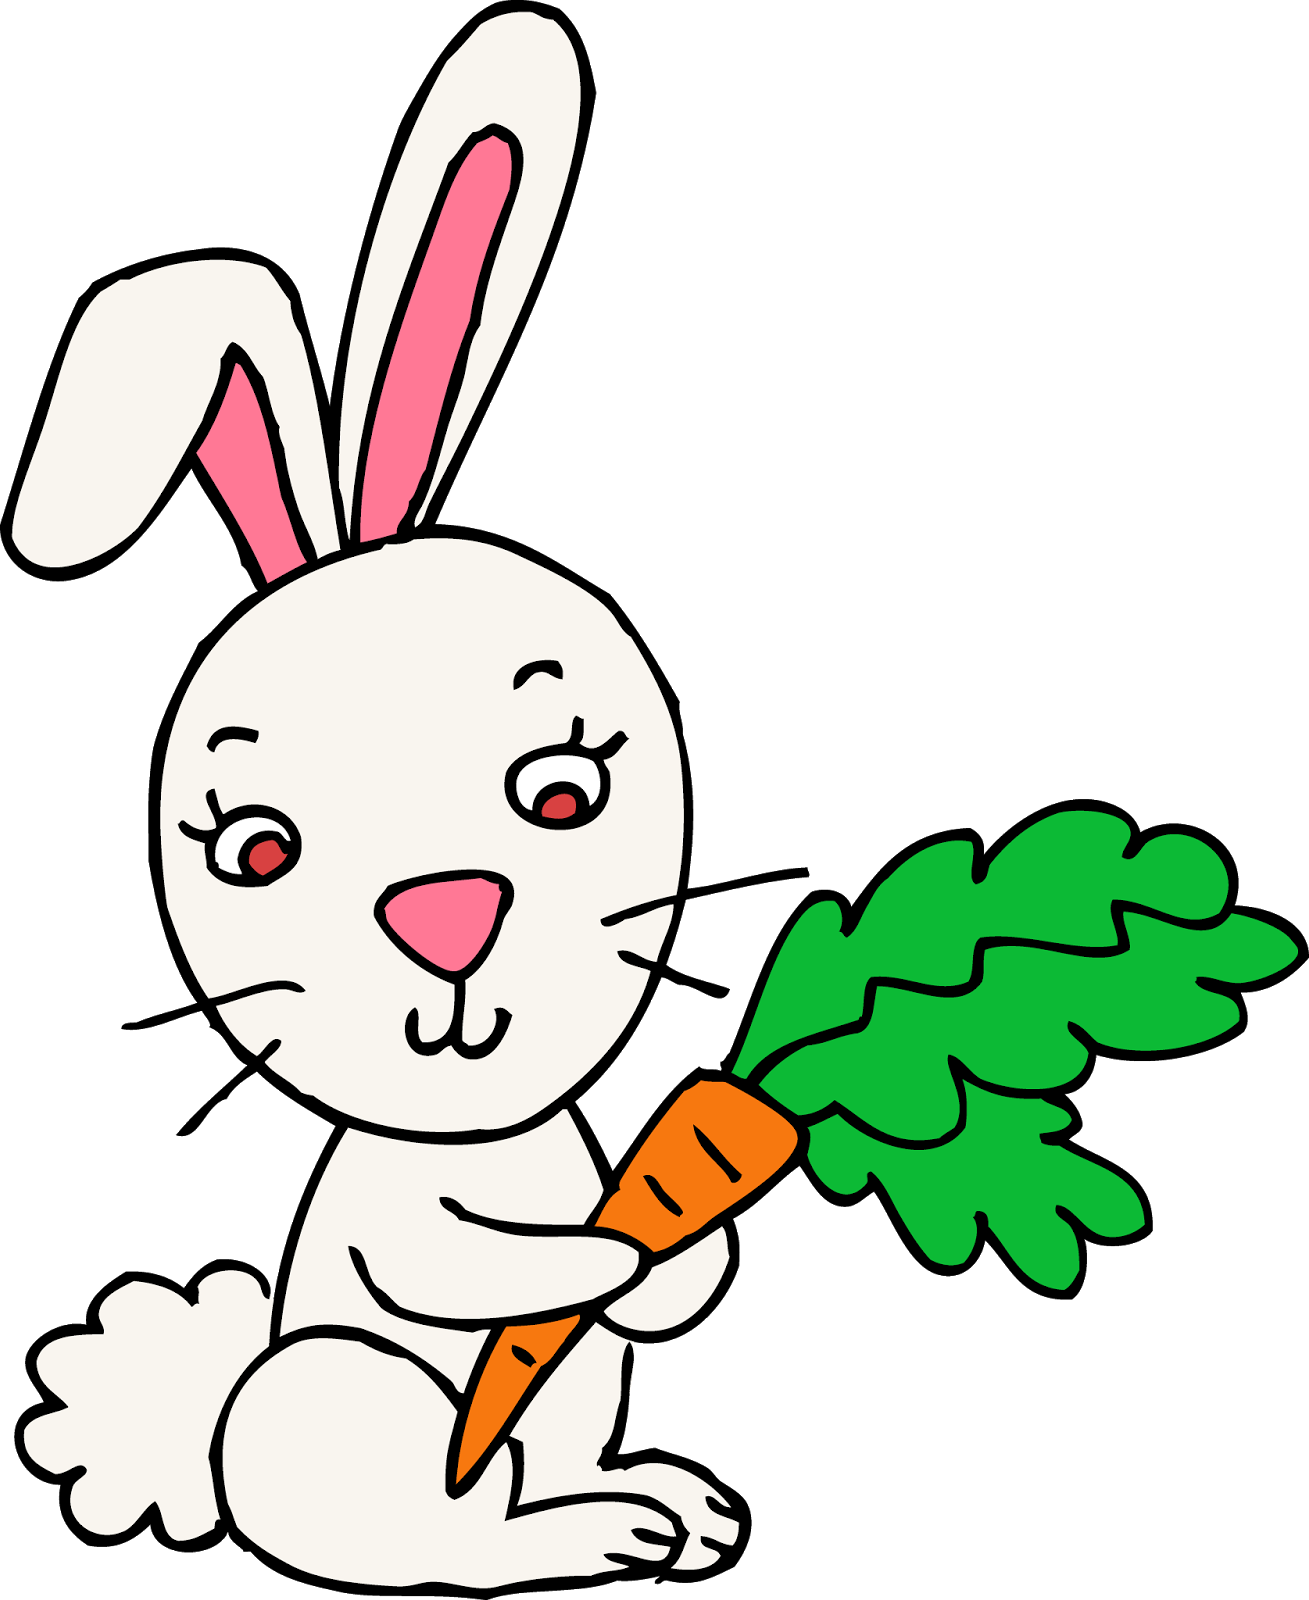 Free Rabbit Vector, Download Free Rabbit Vector png images, Free